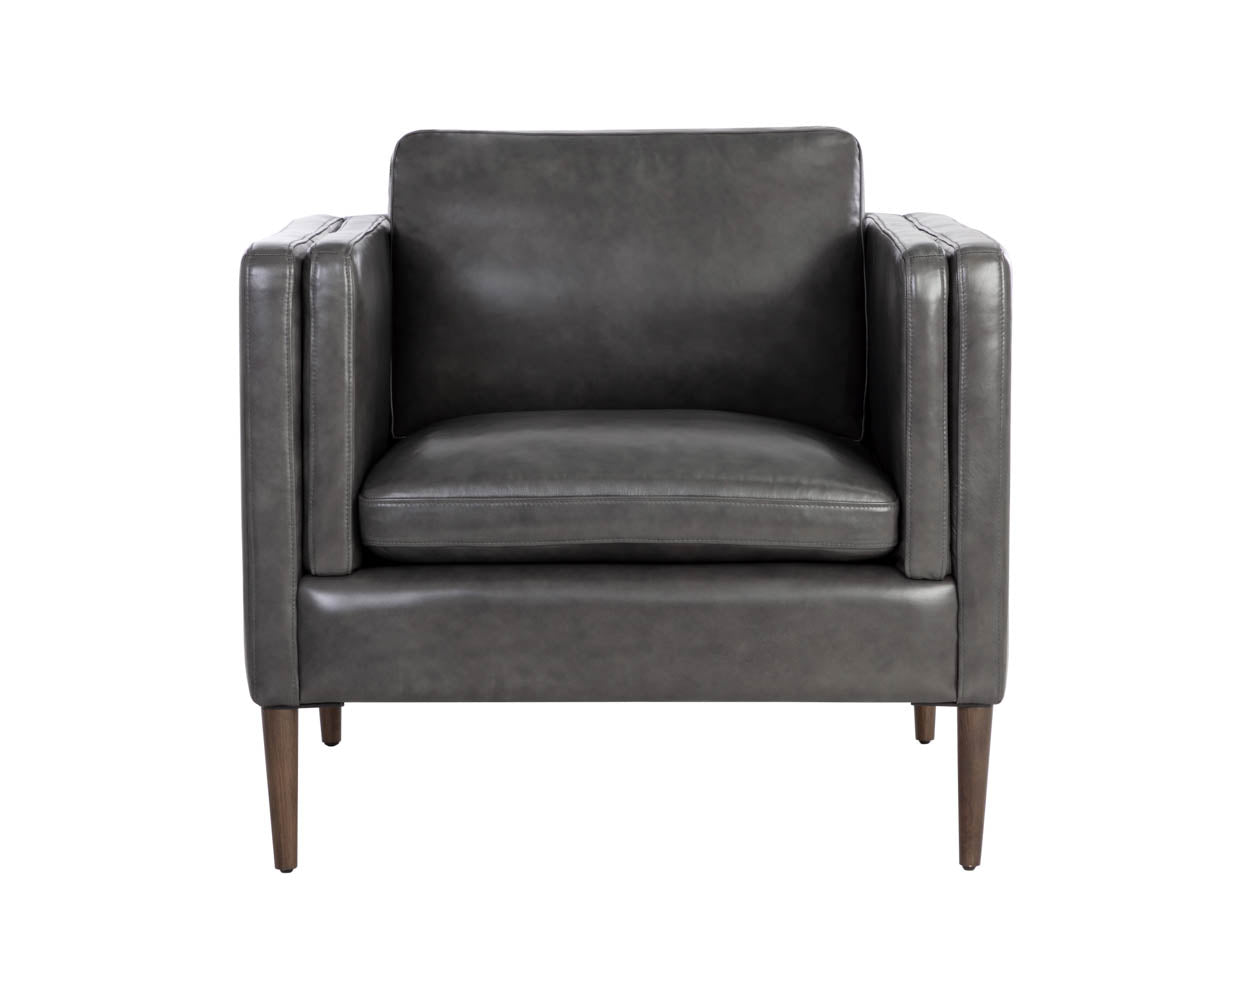 Richmond Armchair - Brentwood Charcoal Leather